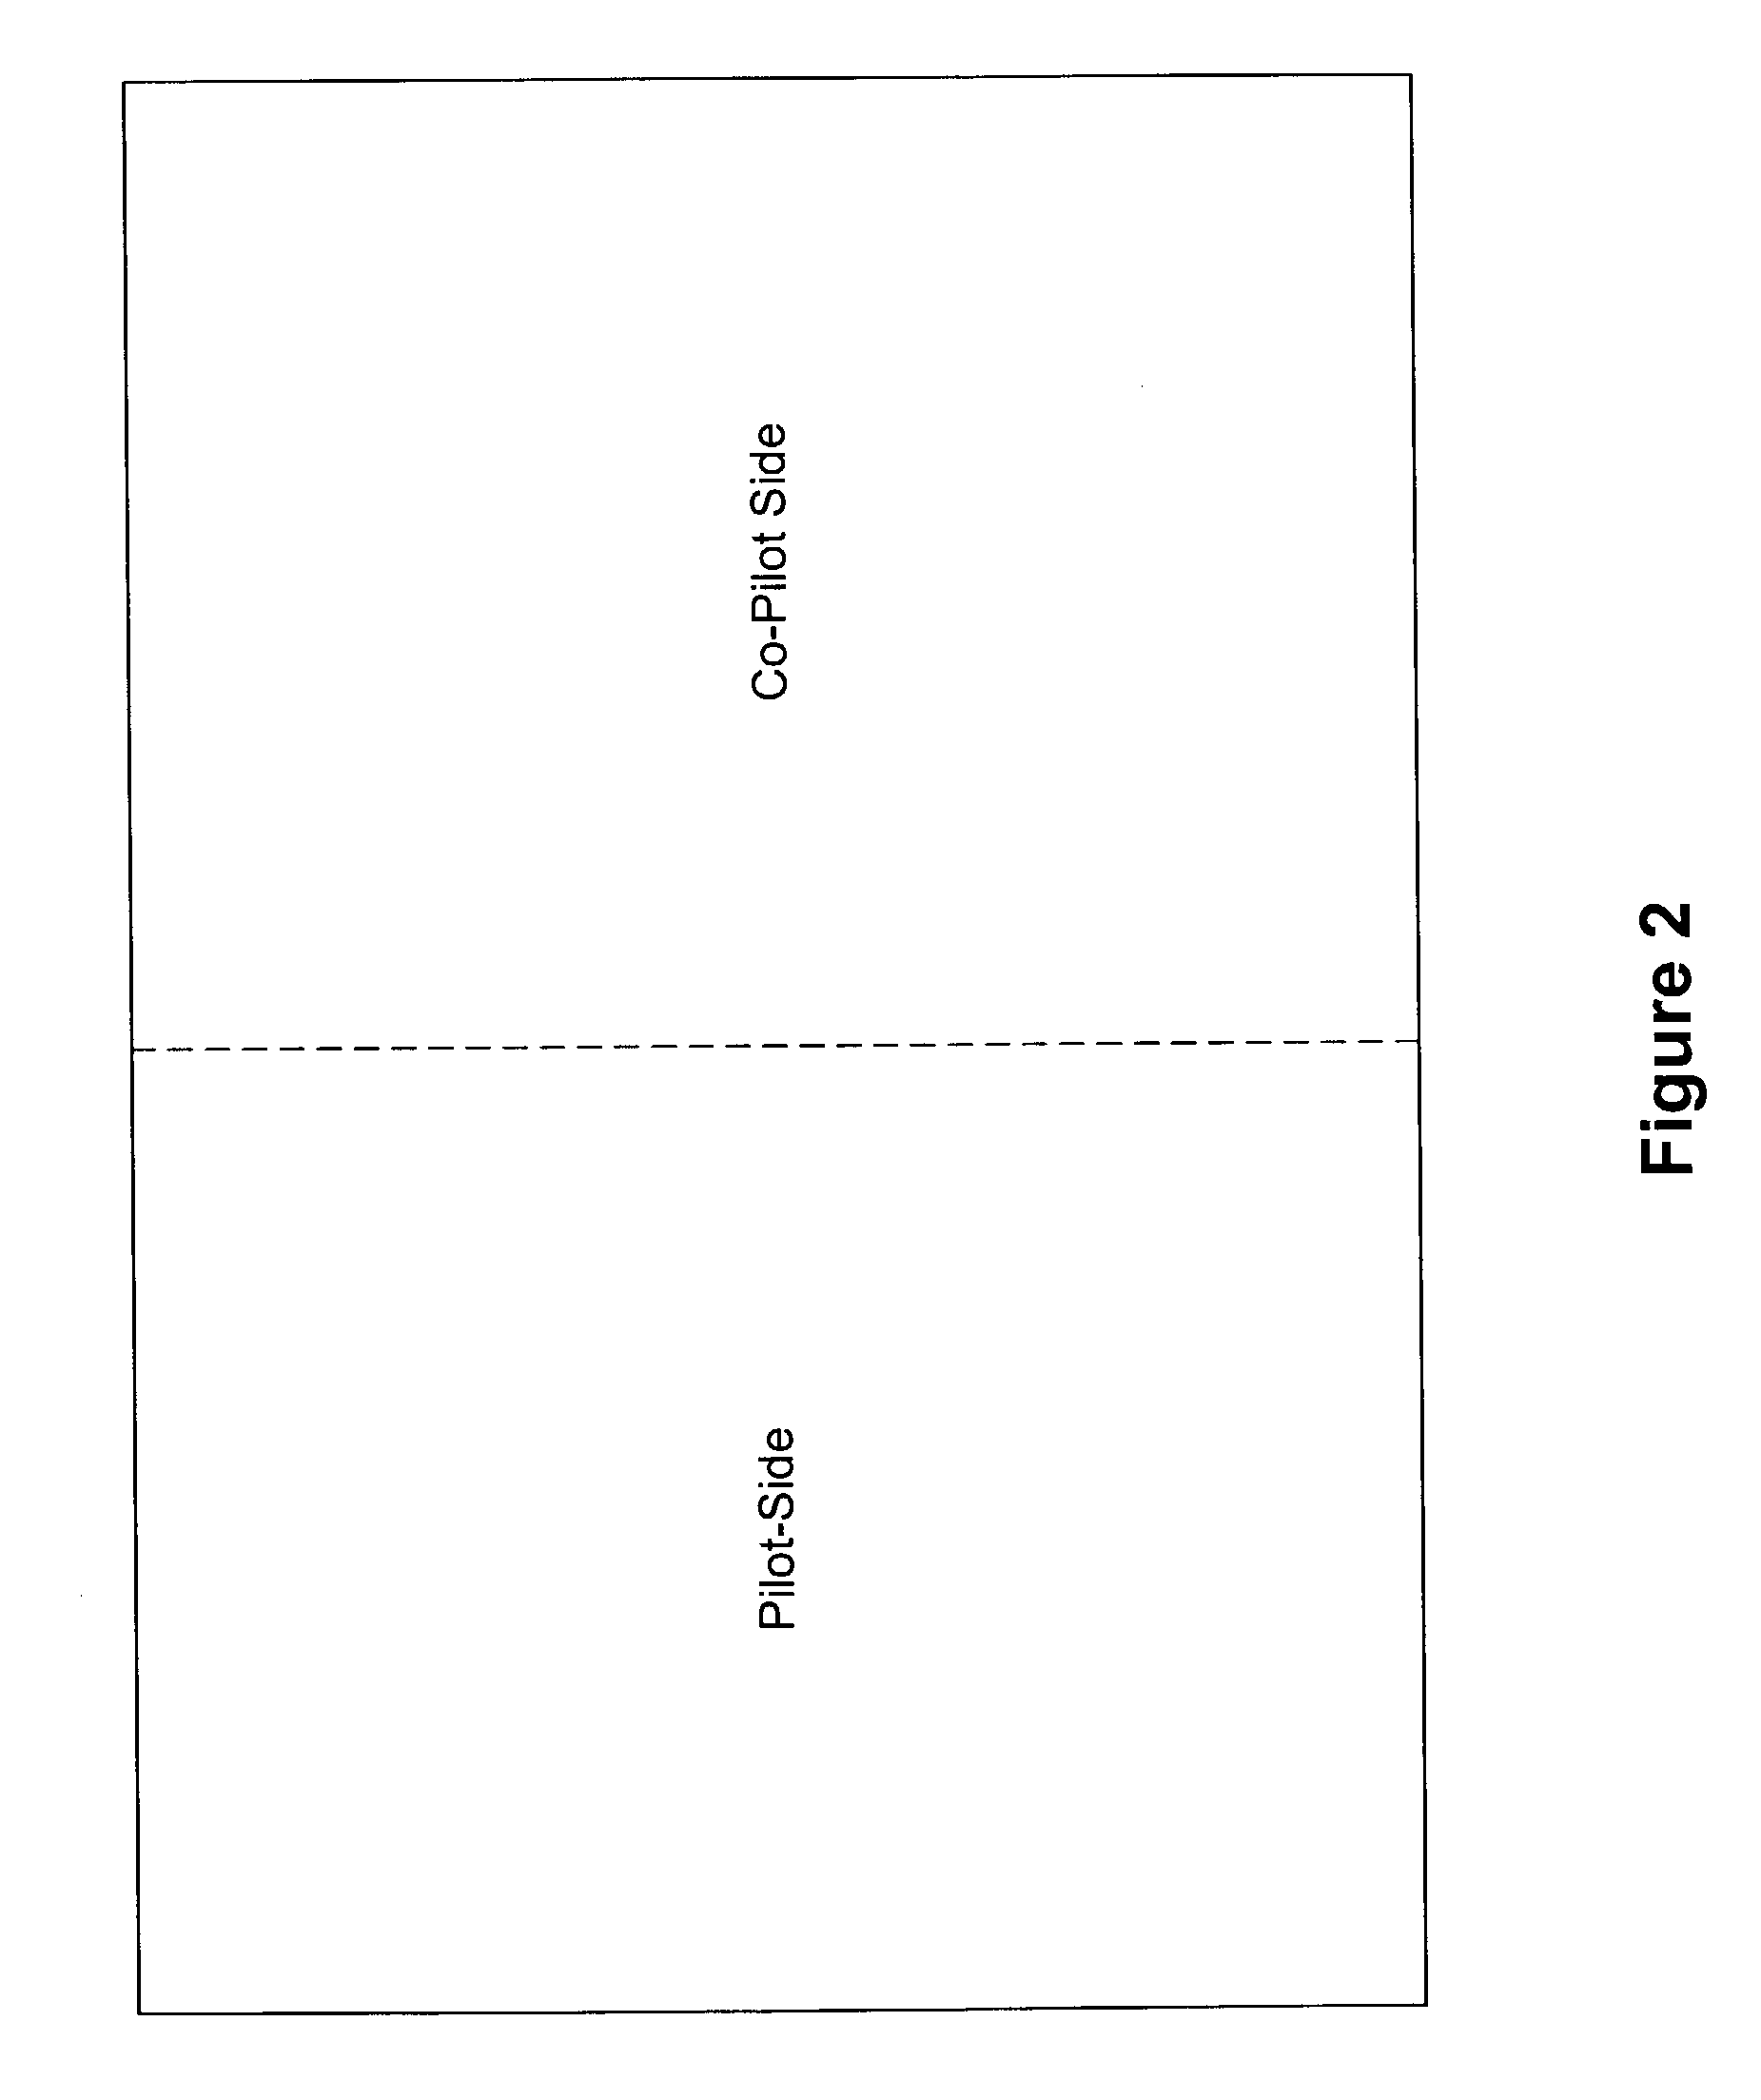 Apparatus and methods for providing a flight display in an aircraft